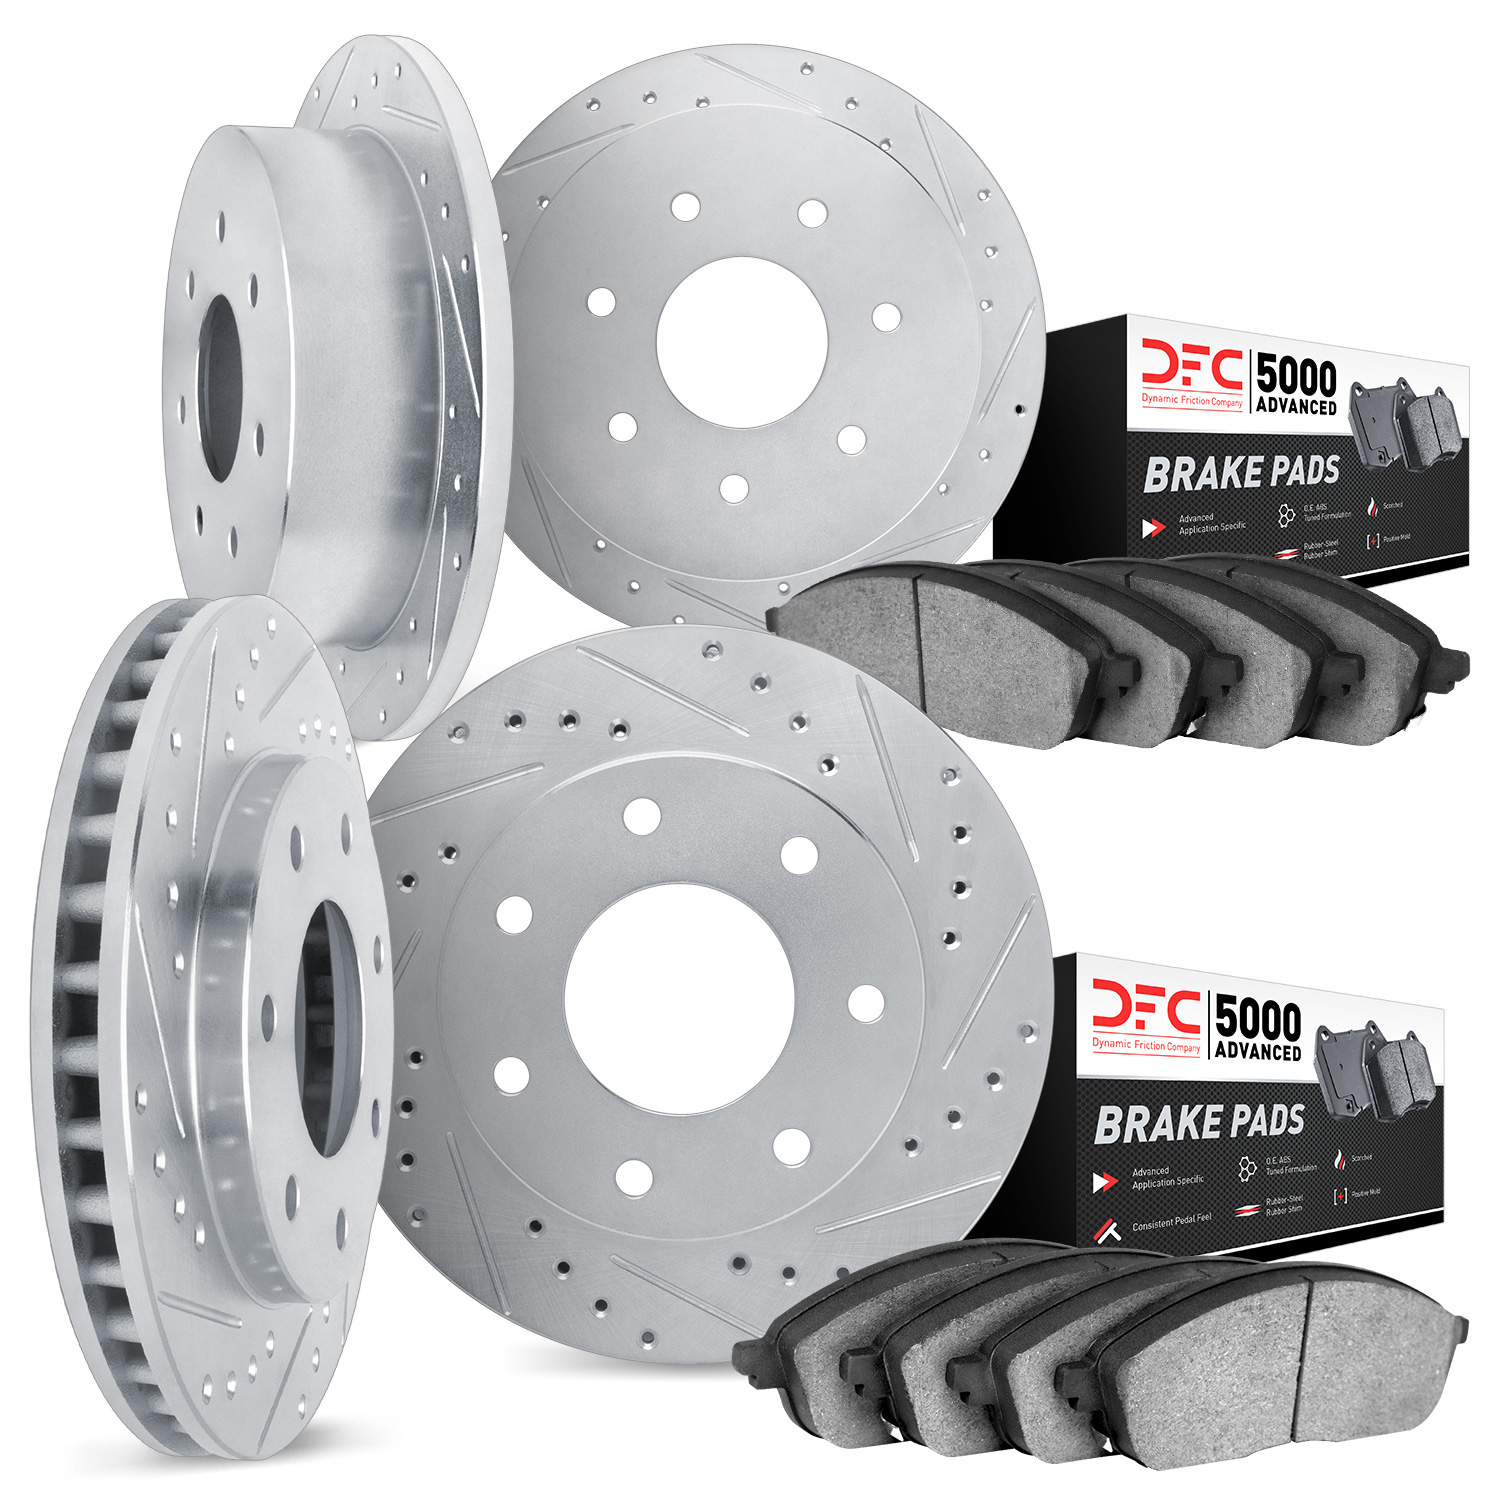 7504-54324 Drilled/Slotted Brake Rotors w/5000 Advanced Brake Pads Kit [Silver], 1997-2004 Ford/Lincoln/Mercury/Mazda, Position: